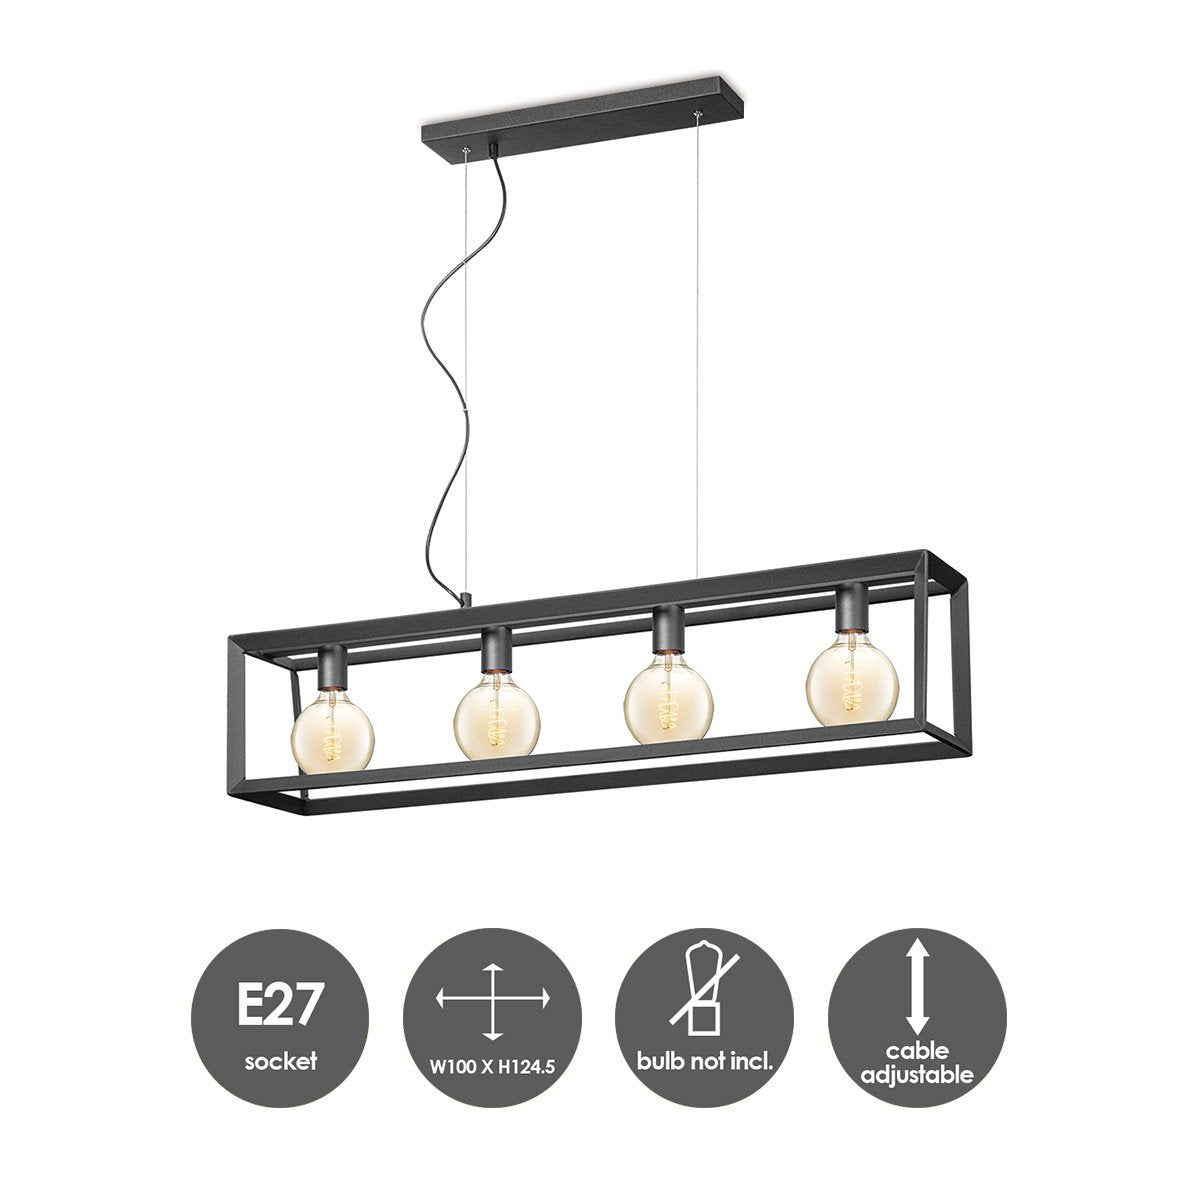 Home Sweet Home Dito Square 4 Light Hanging Lamp Black